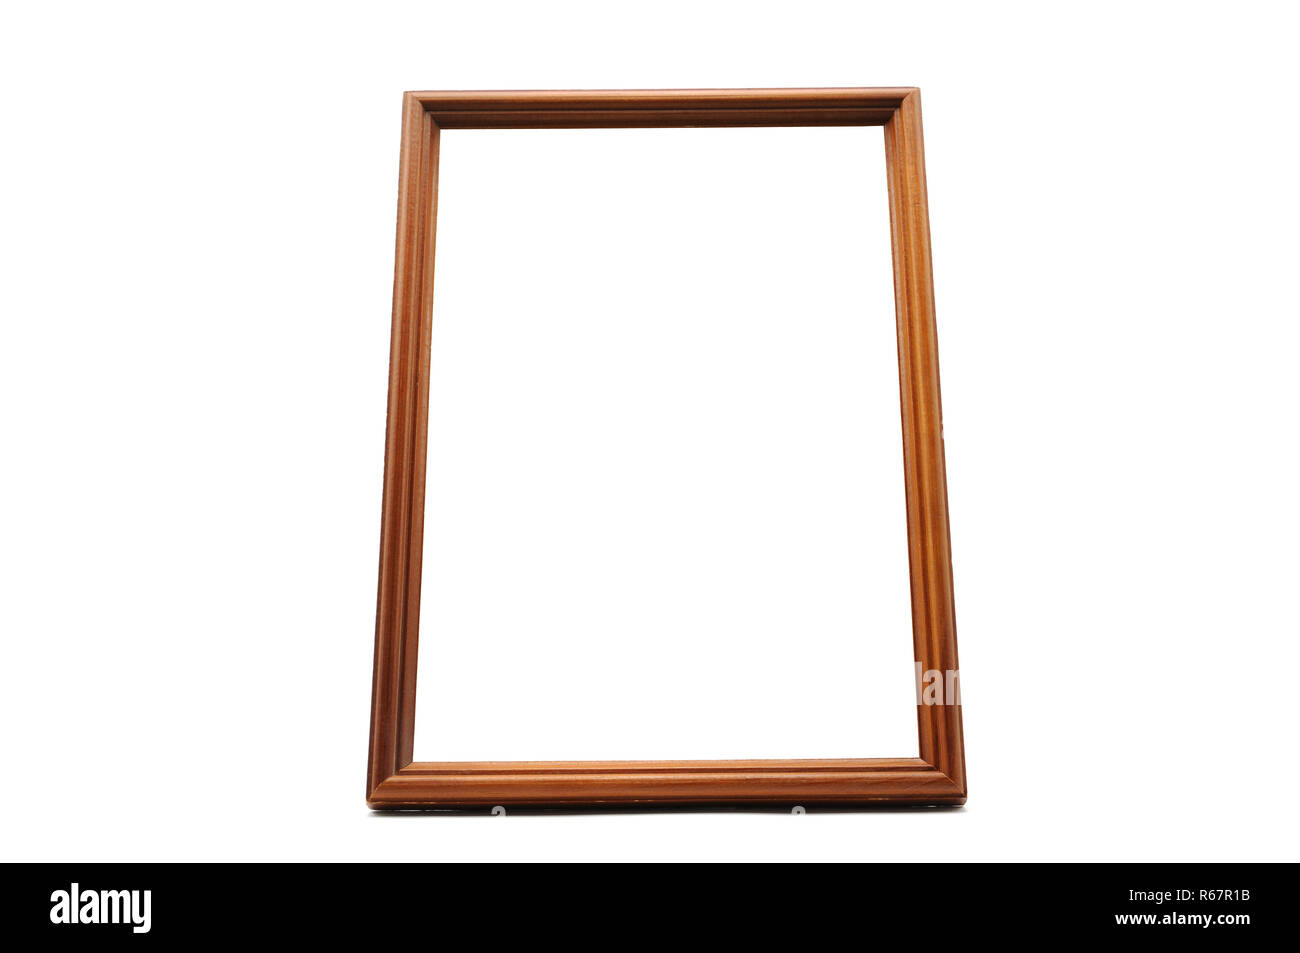 Royal mirror frame Cut Out Stock Images & Pictures - Alamy